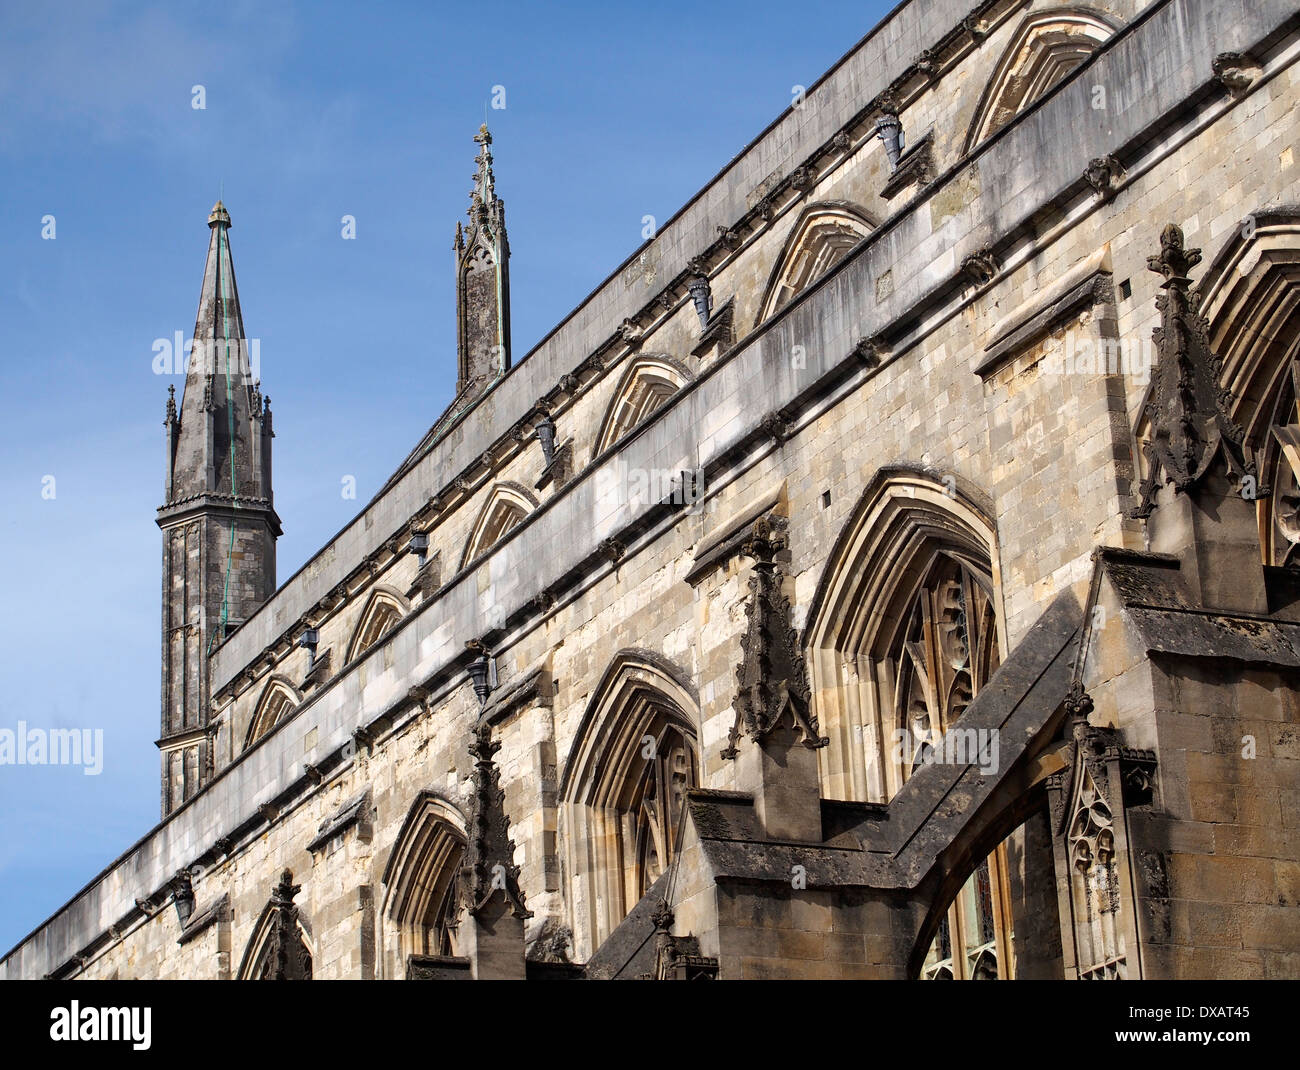 Perpendicular style medieval architecture showing windows and flying buttresses at Winchester Cathedral, Hampshire. Stock Photo